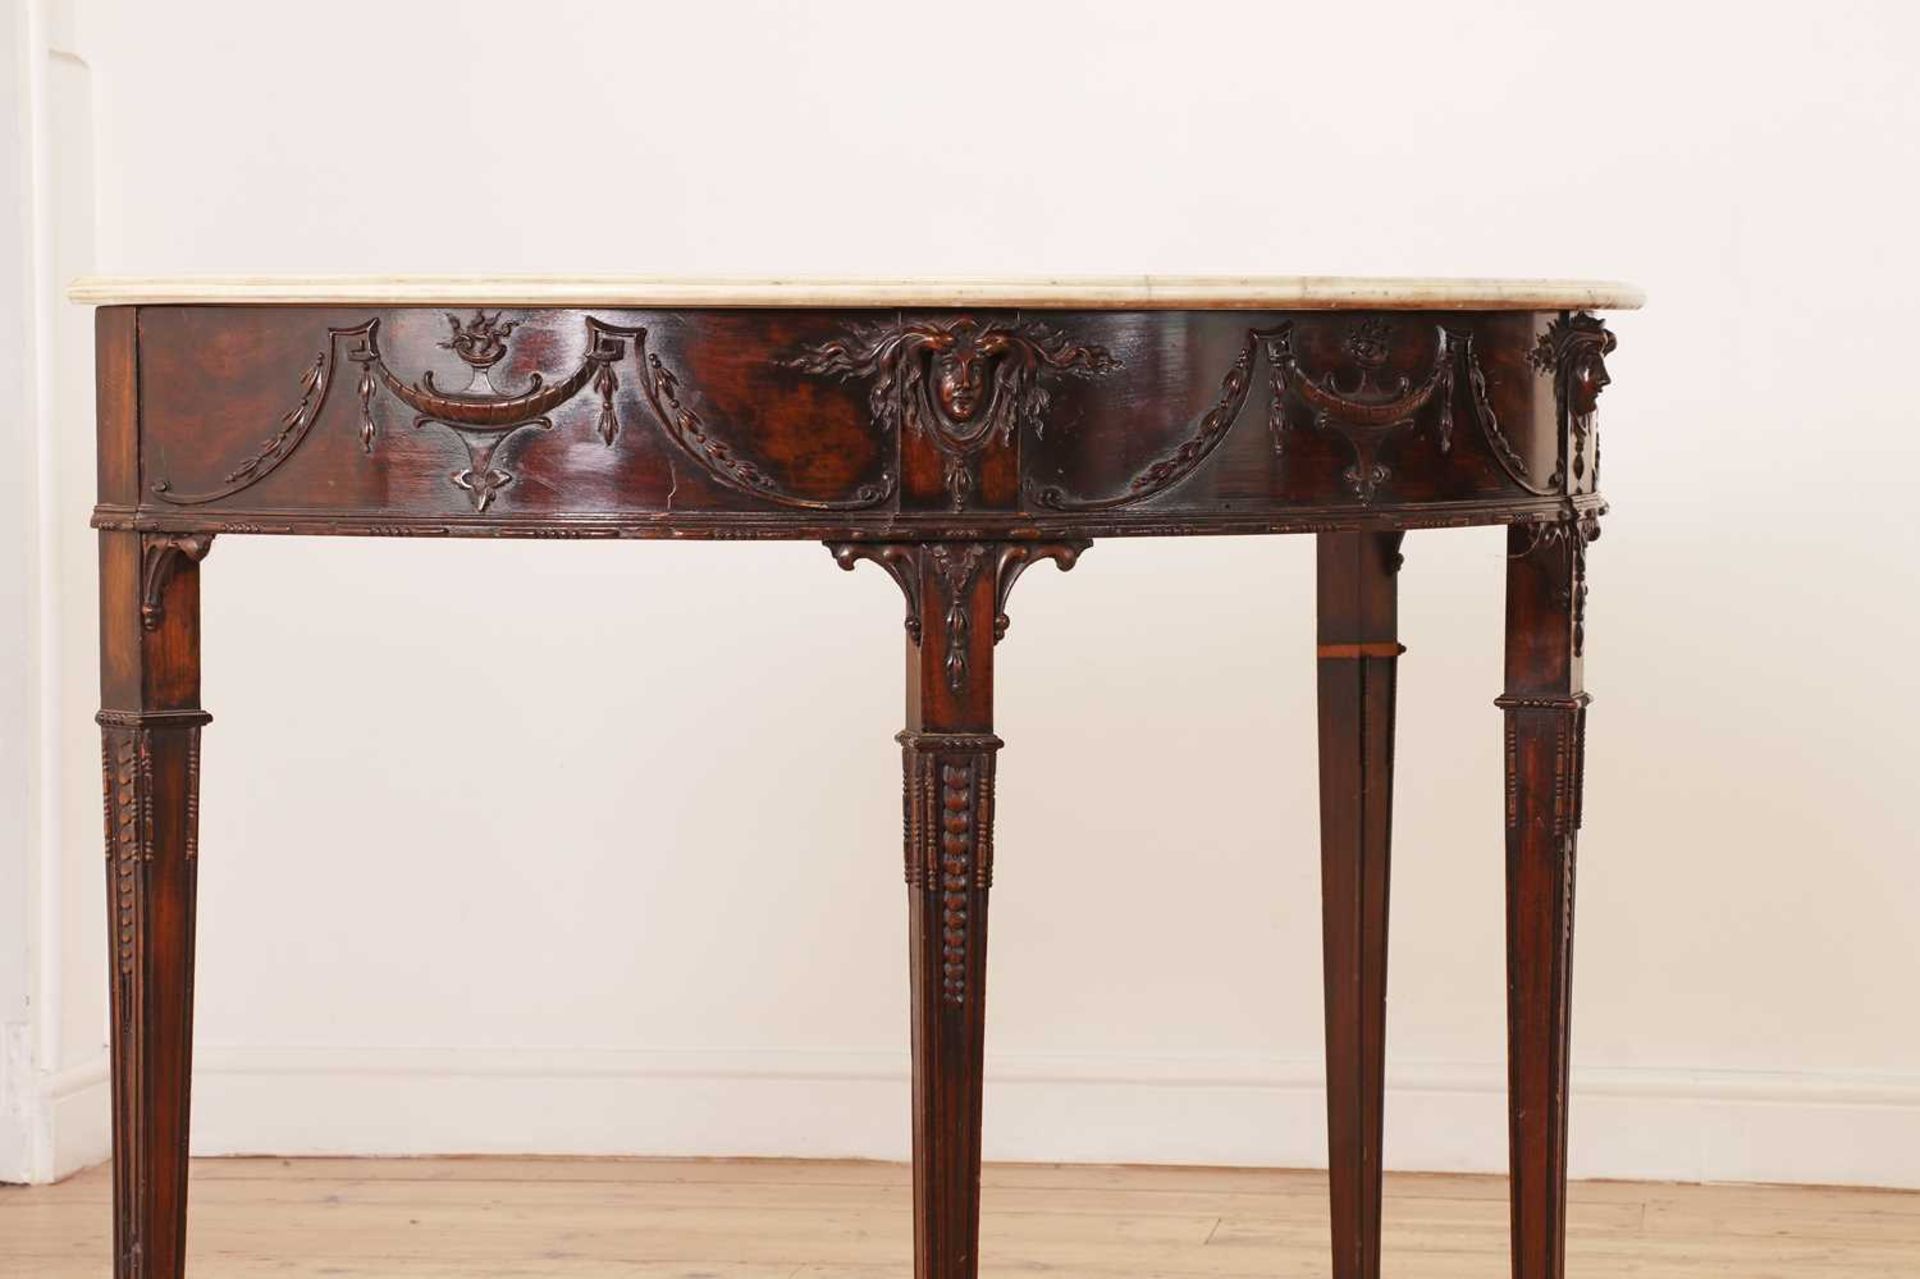 A pair of George III-style mahogany pier tables in the manner of Robert Adam, - Image 12 of 33